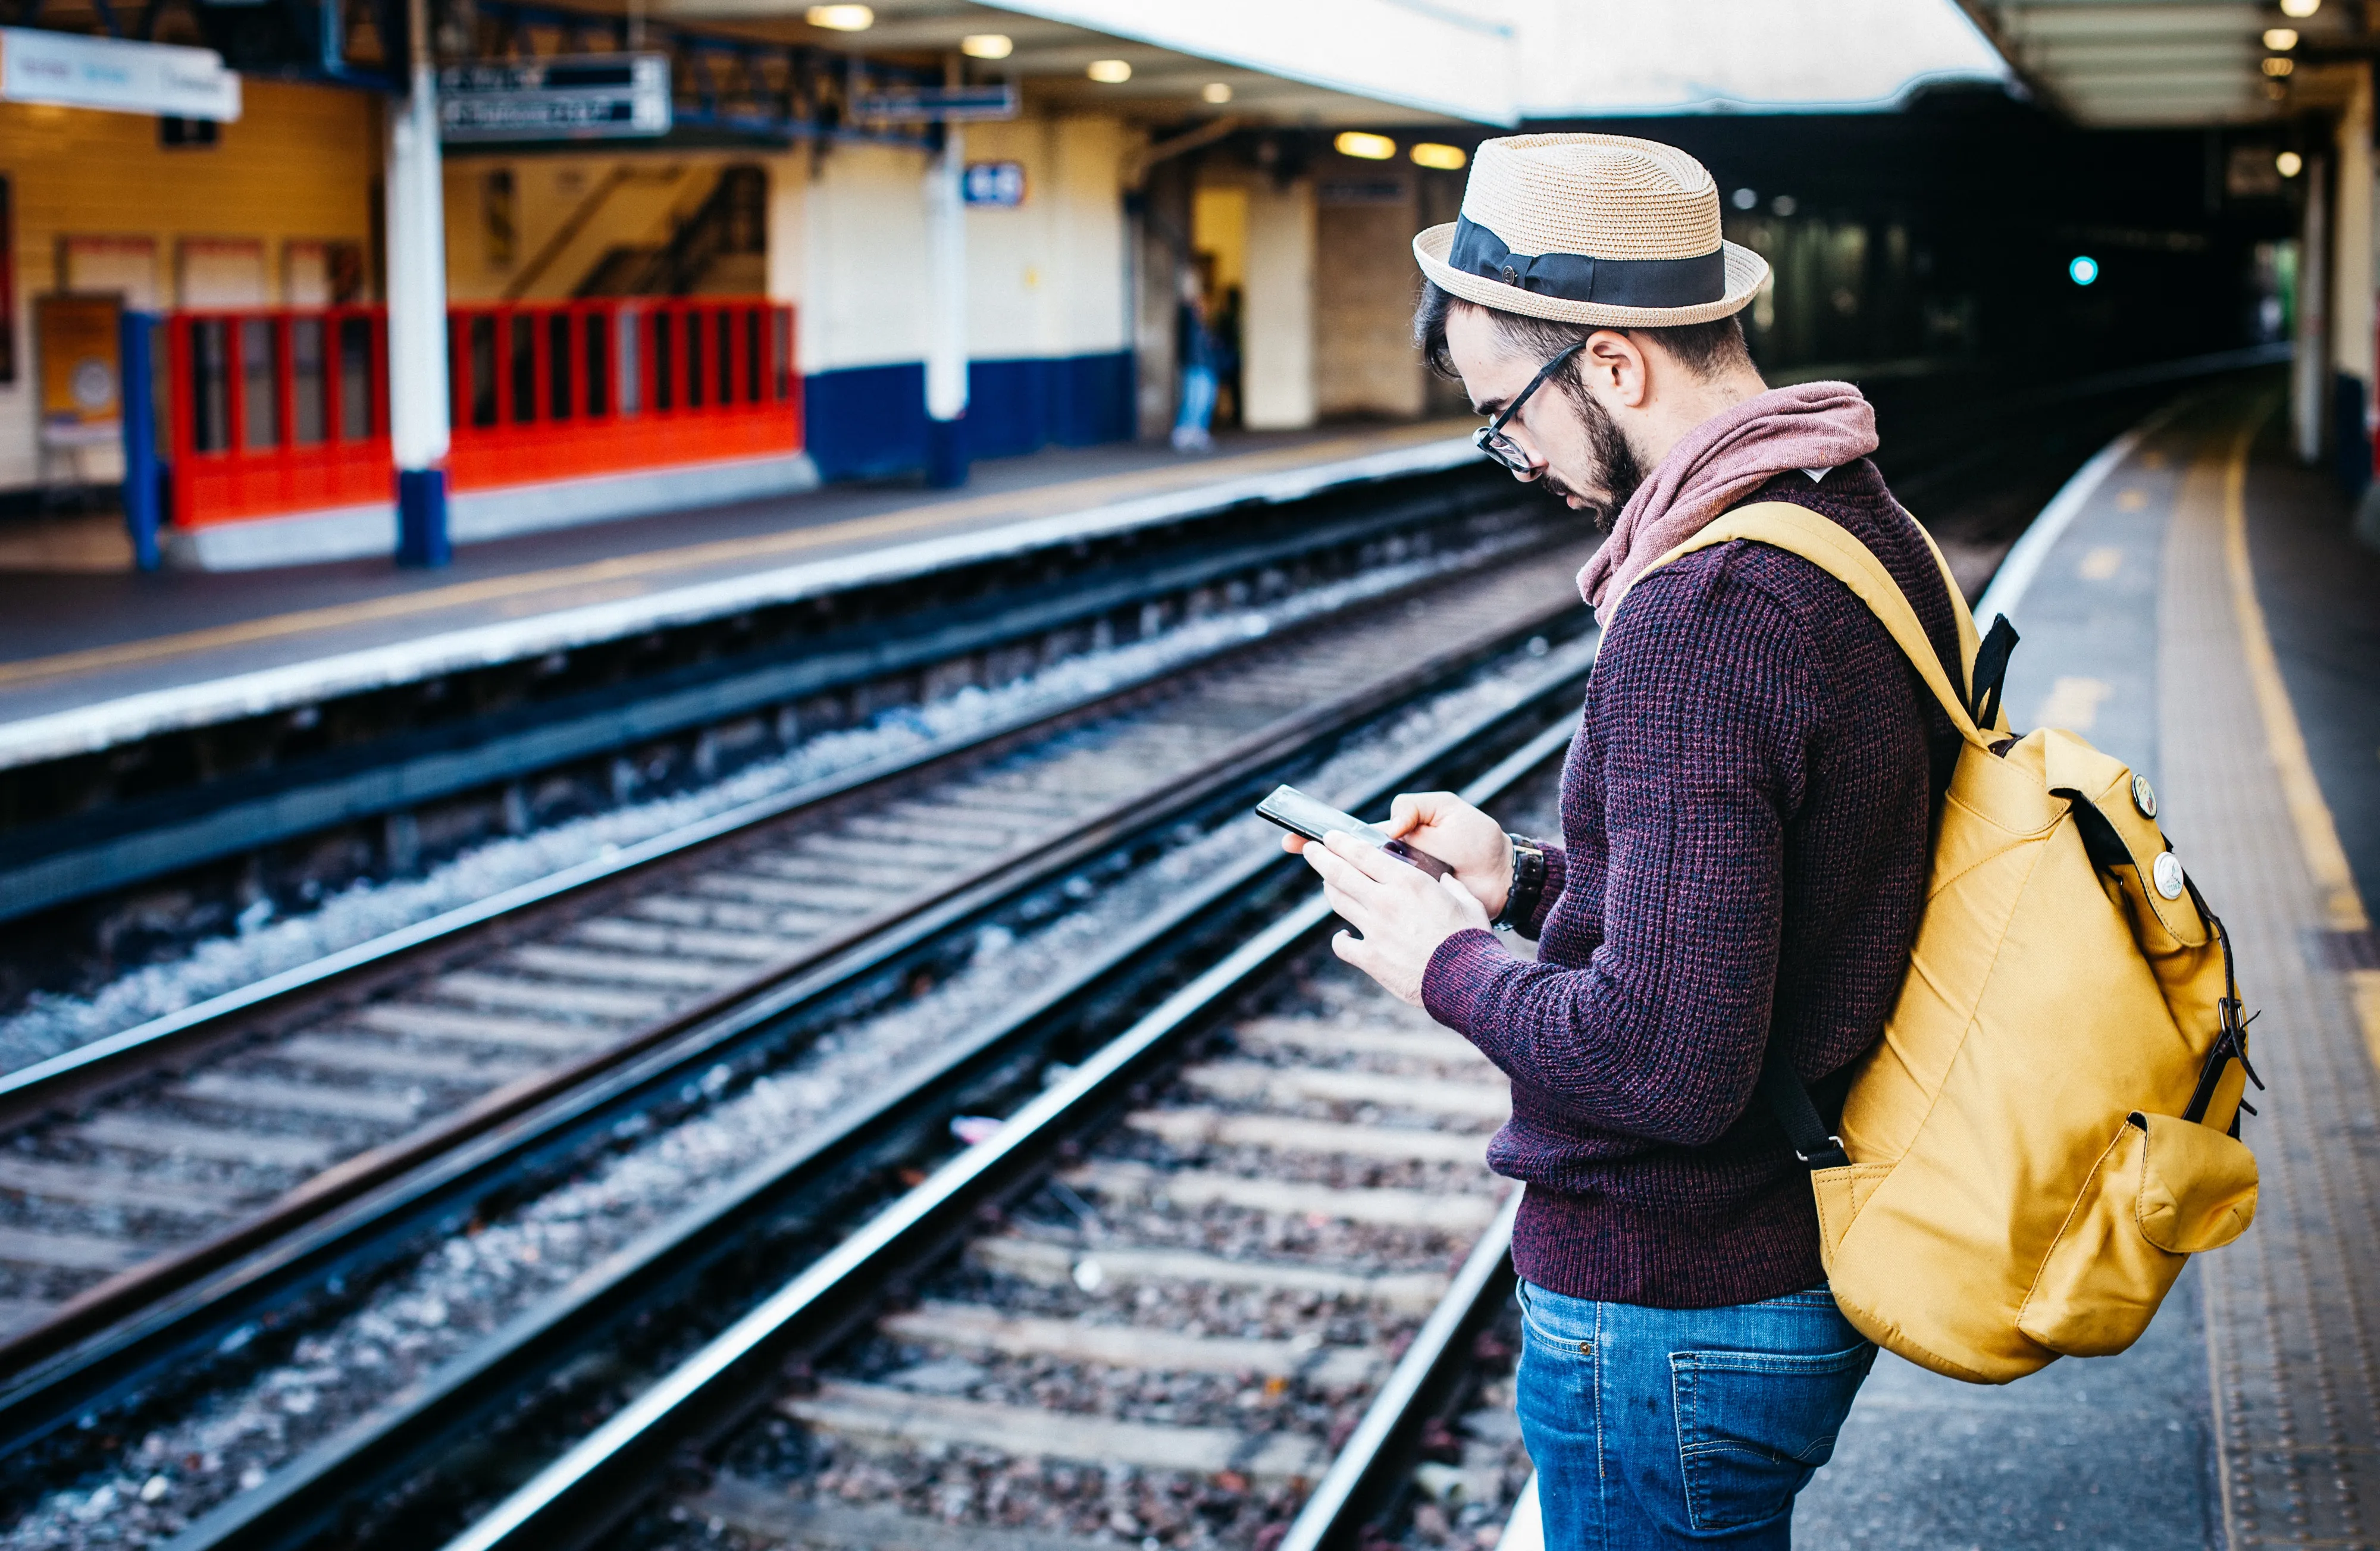 Man standing close to a track at a train station holding his smartphone and wearing a bright yellow bag.